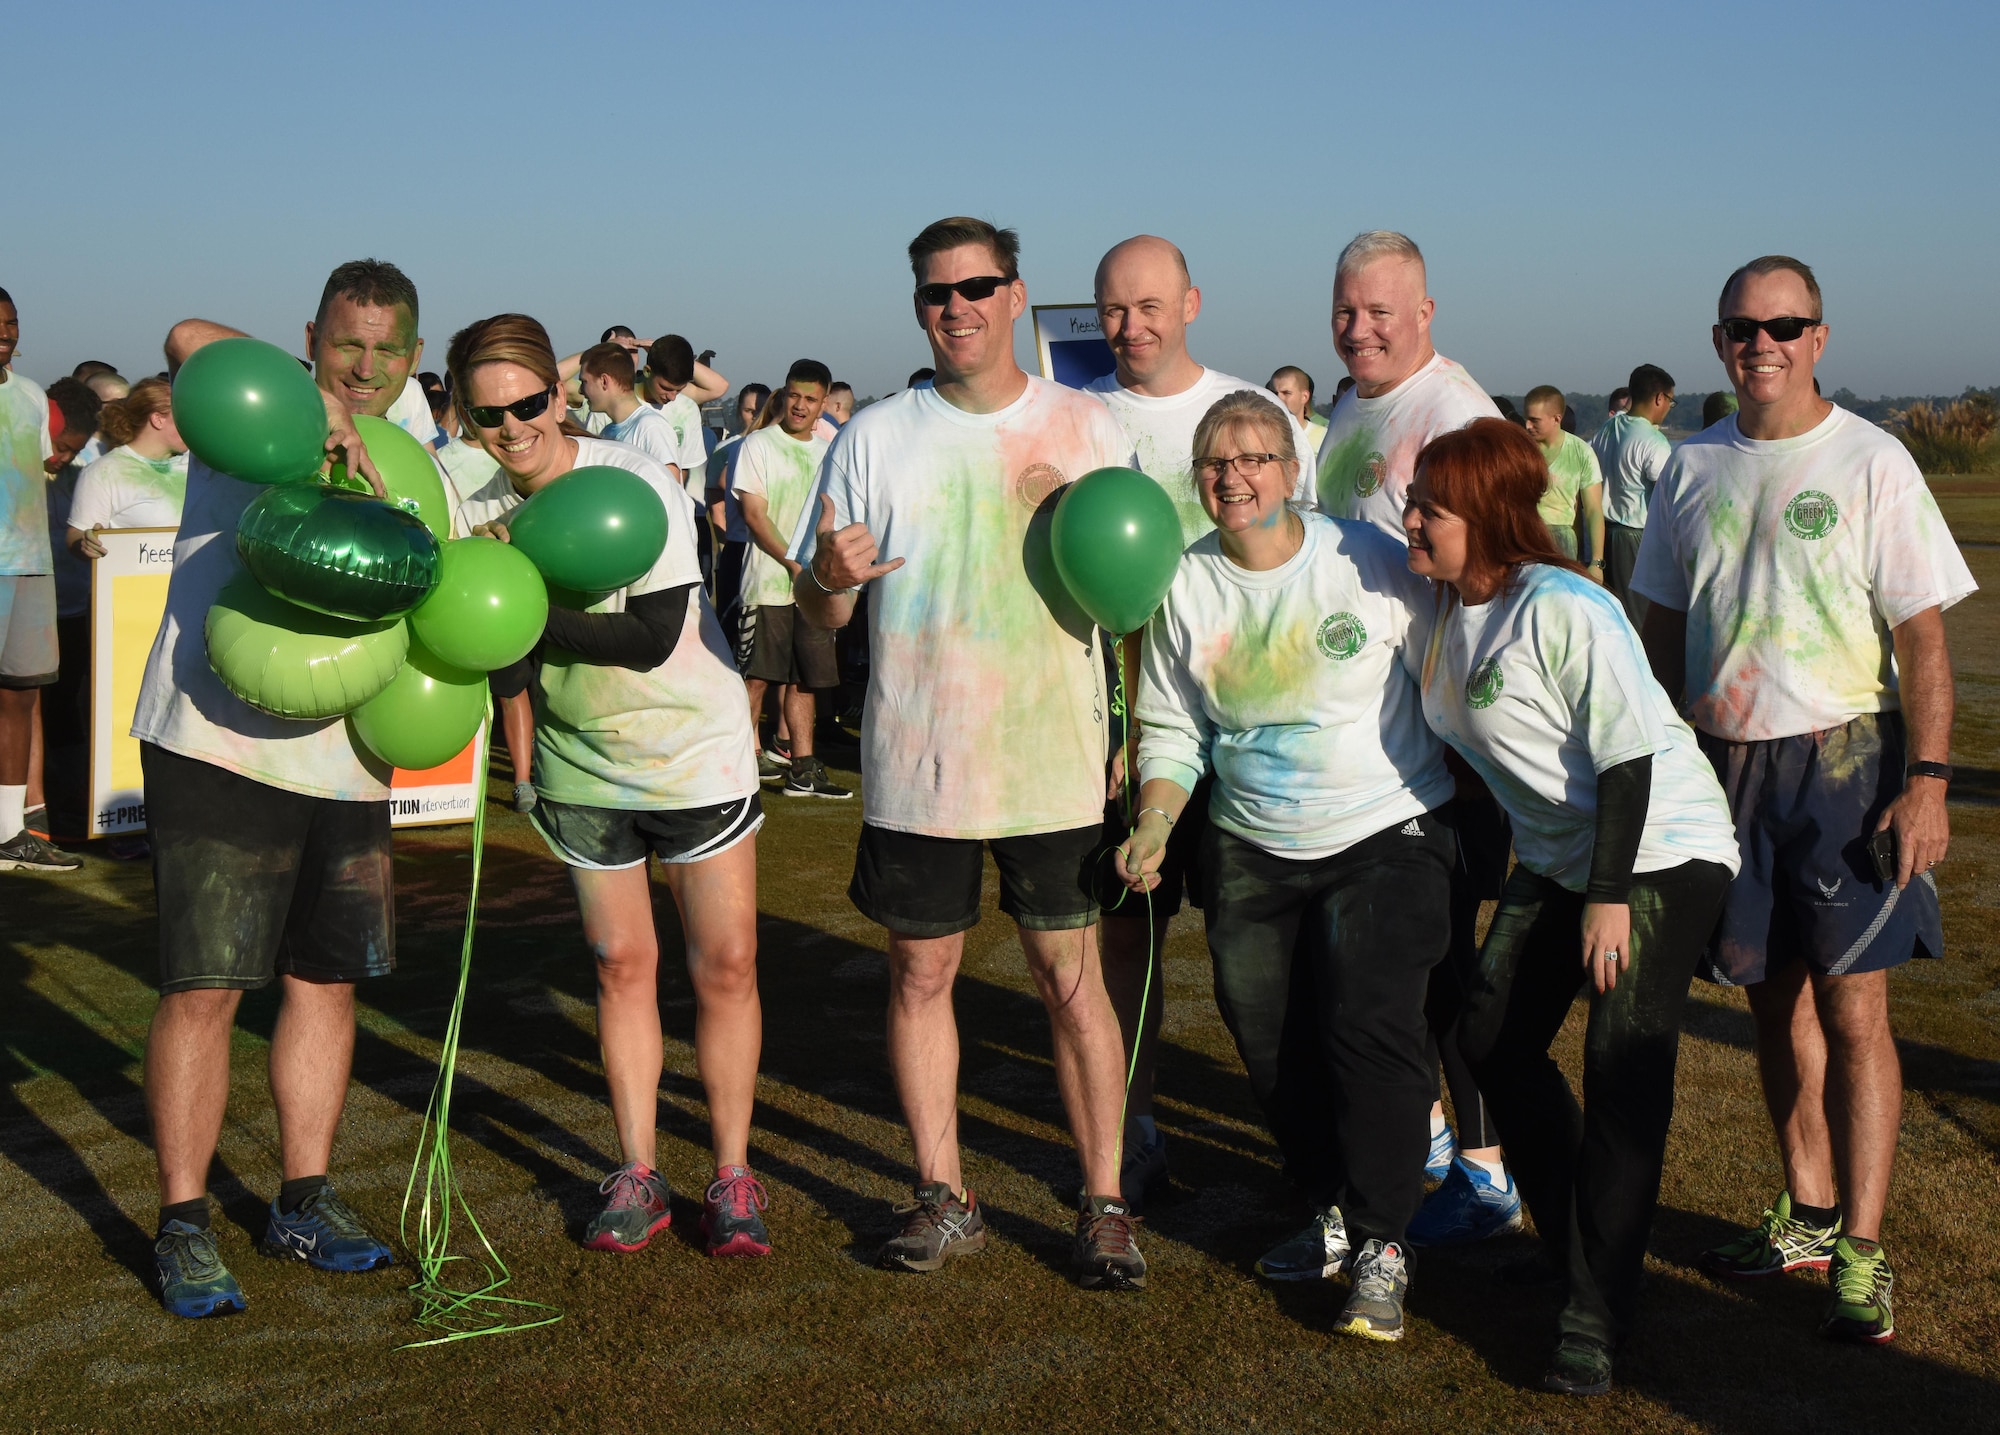 Leadership from the 81st Training Wing pose for a group photo following a Wing color run at the Marina Park Nov. 17, 2016, on Keesler Air Force Base, Miss. The run was one of several events held throughout Dragon Week, which focuses on resiliency and teambuilding initiatives across the base. (U.S. Air Force photo by Kemberly Groue/Released)